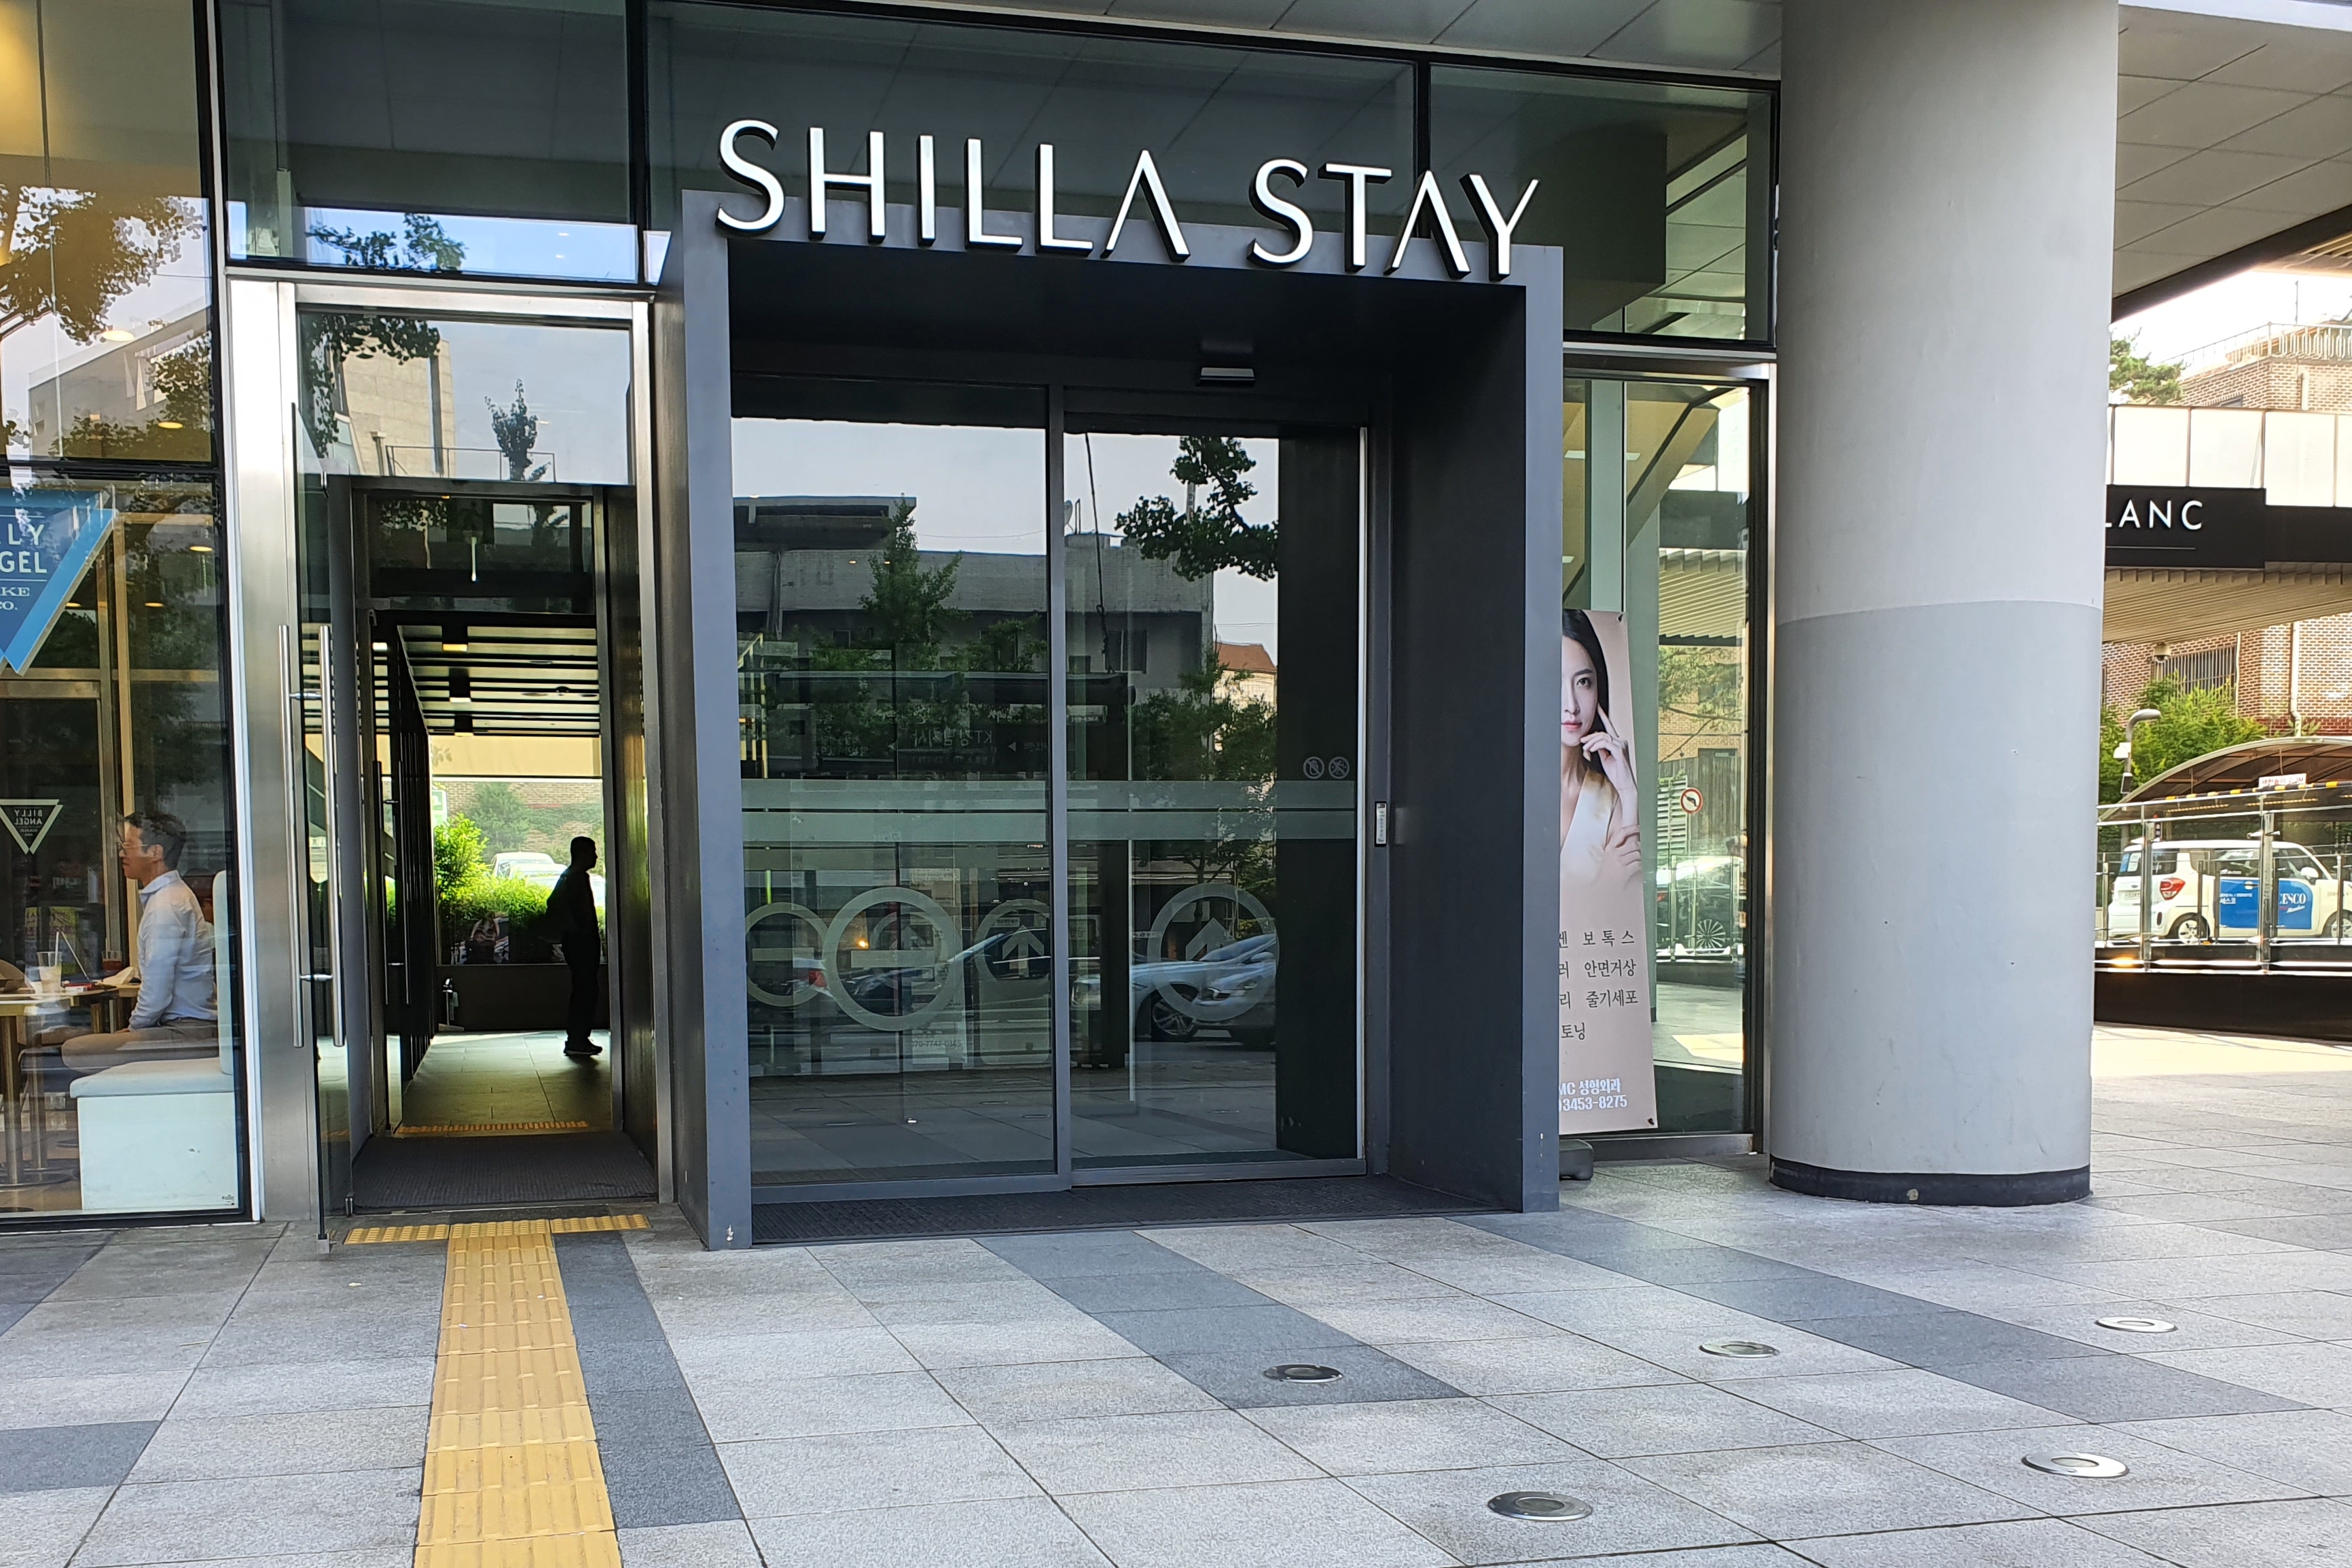 Shilla Stay Yeoksam1 : The hotel main entrance with both an automatic door and a higed door